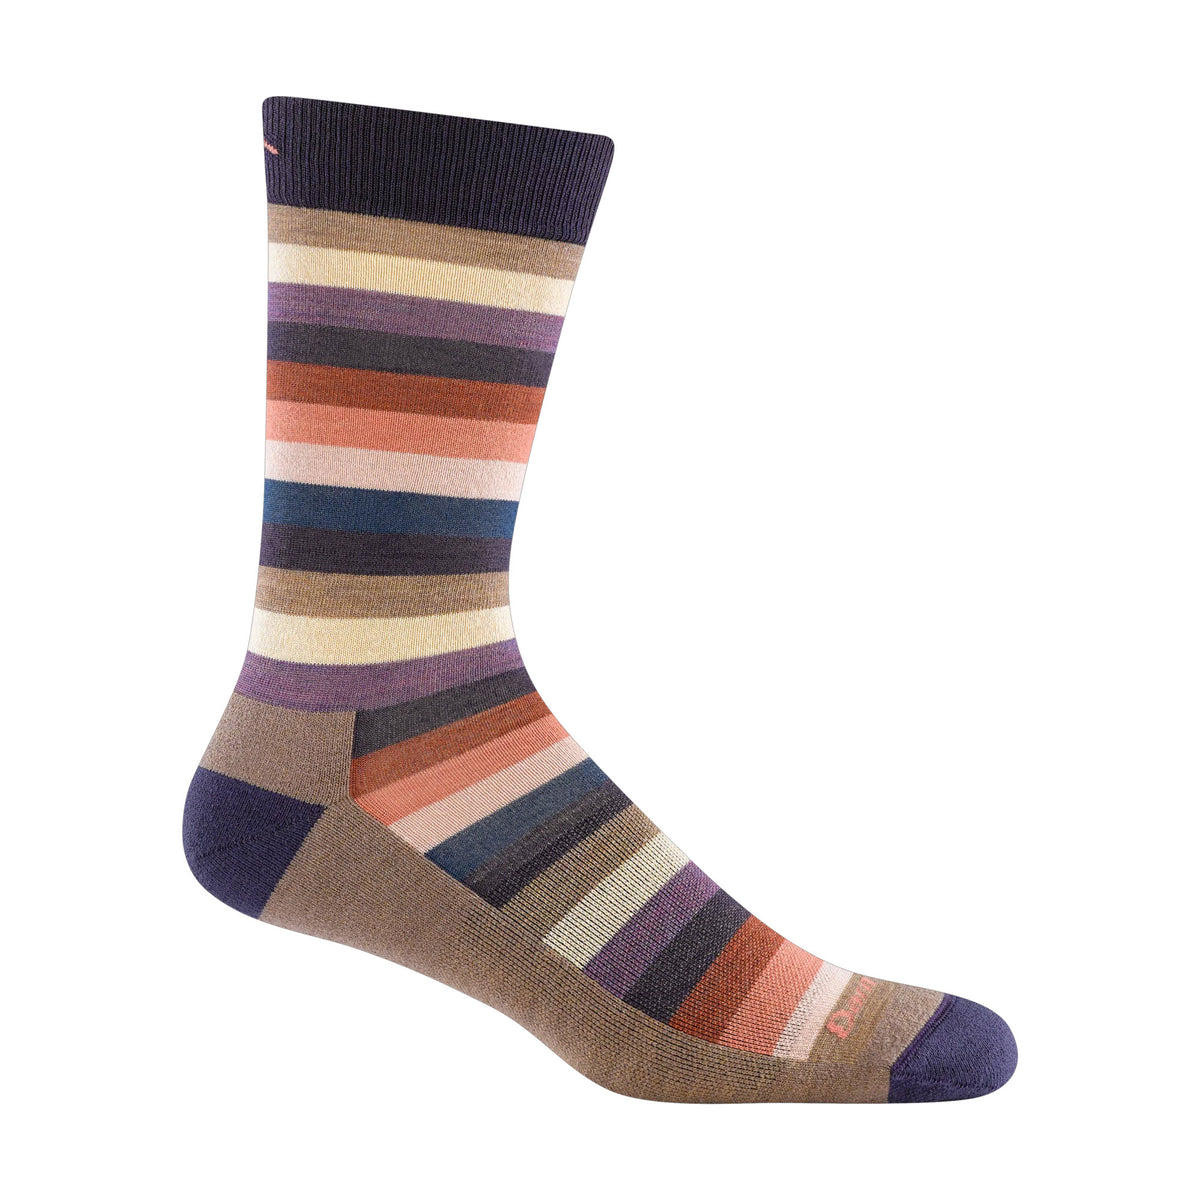 A single Darn Tough Merlin Crew socks with multicolored horizontal stripes and a reinforced heel and toe area displayed against a white background.